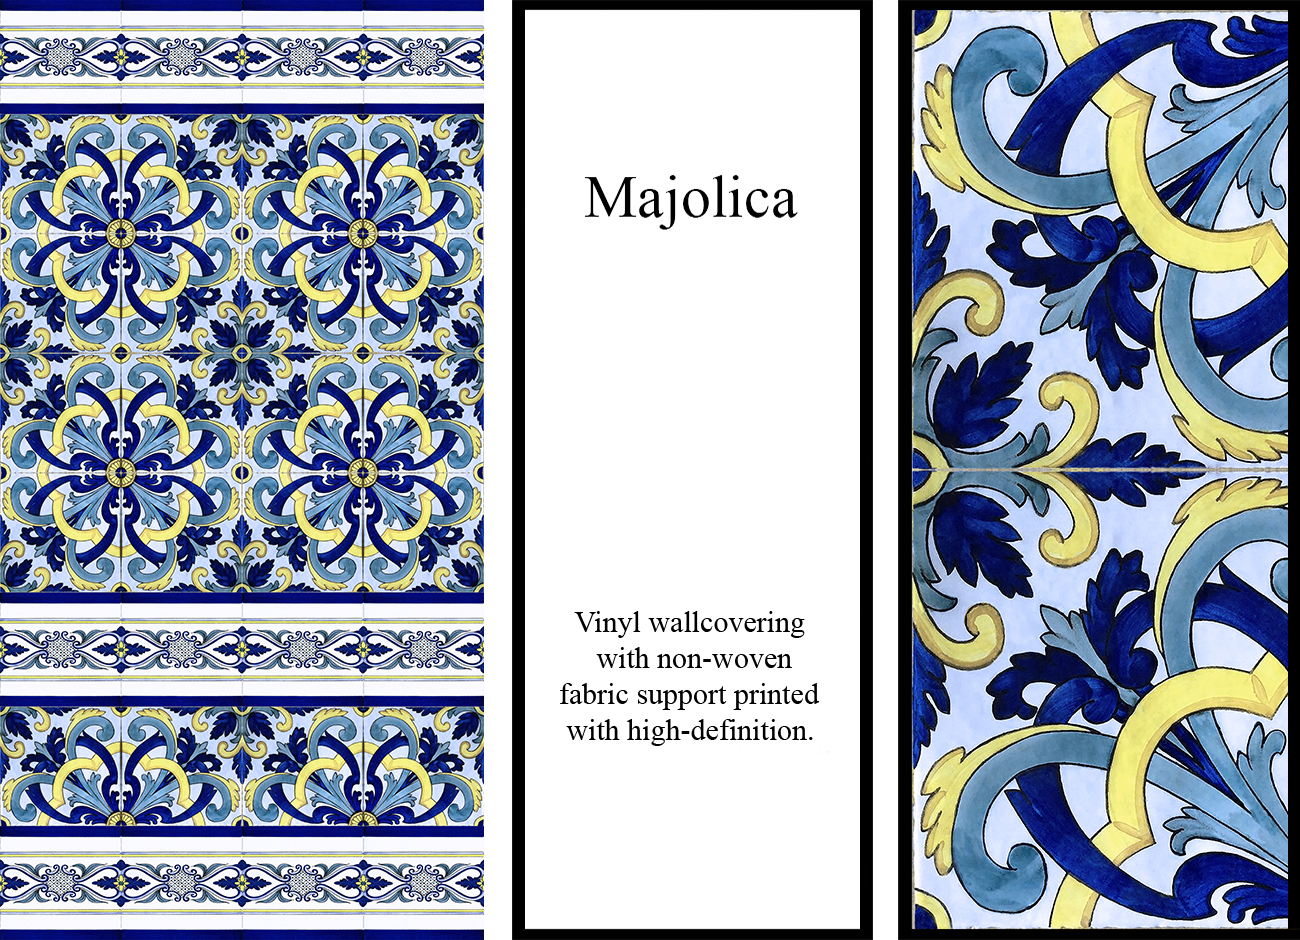 Mediterranean-style majolica wallpaper with floral motifs in bright blue, blue light and yellow colours